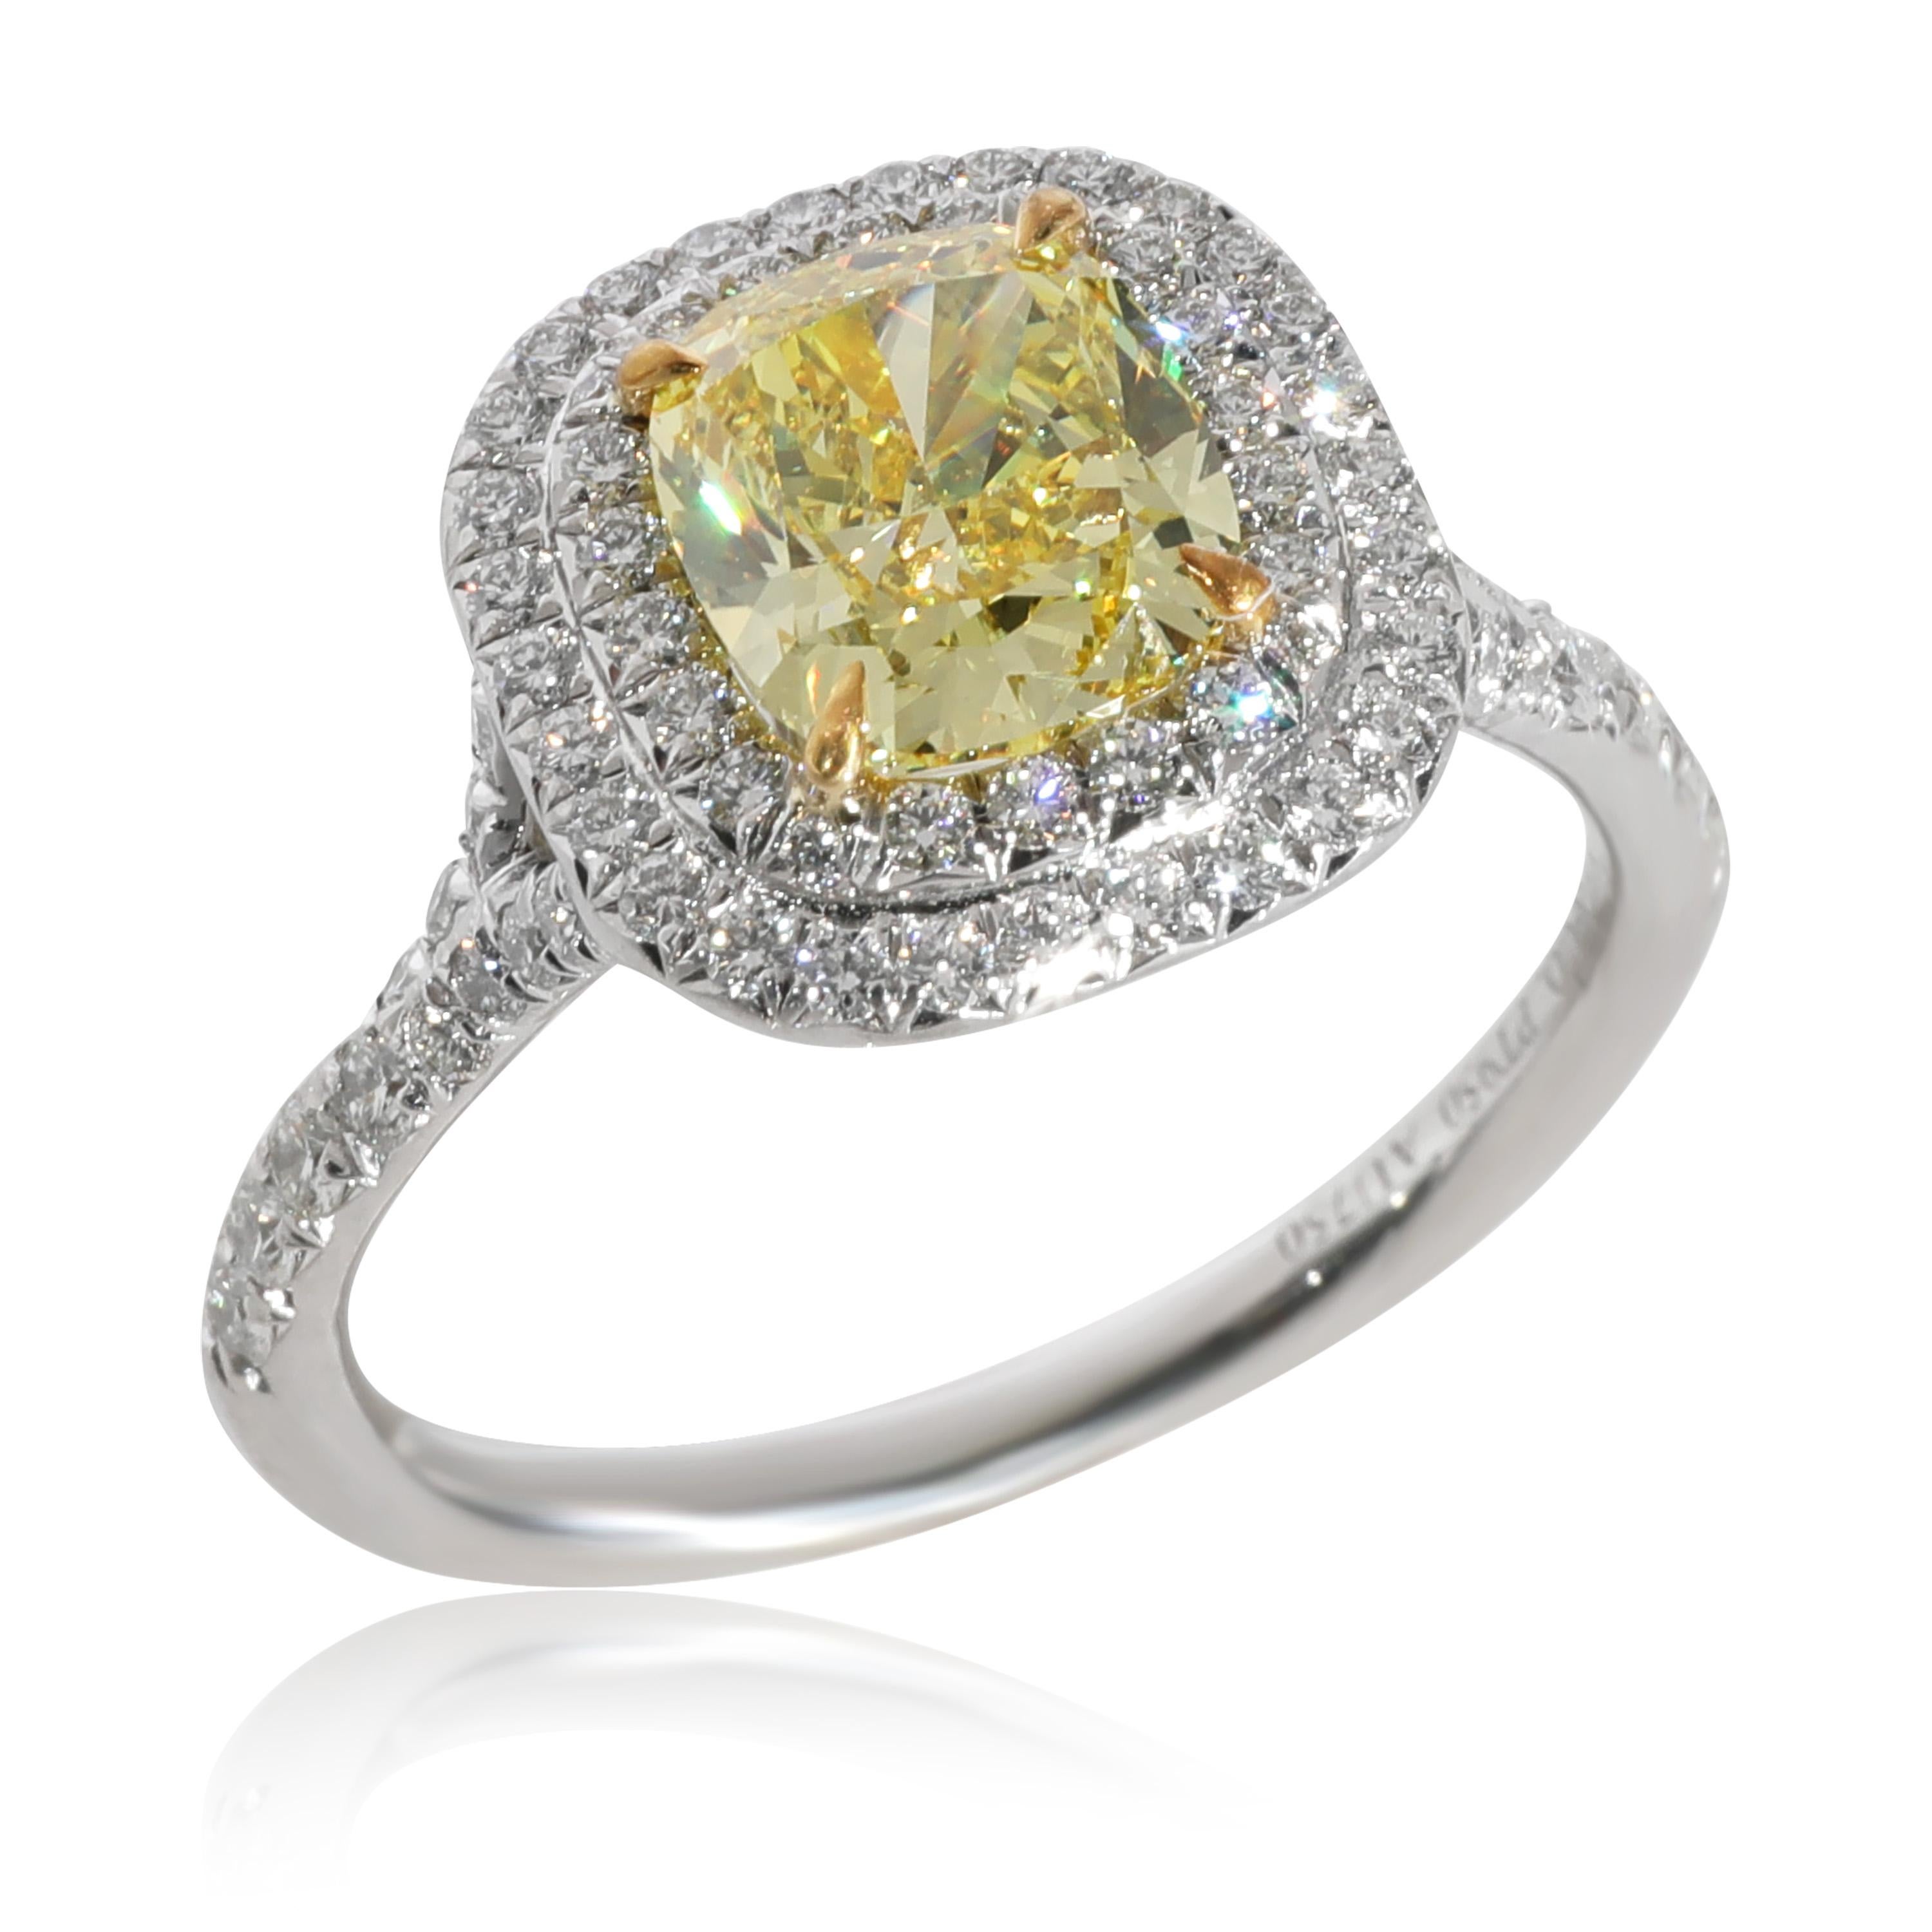 Cushion Cut Tiffany & Co. Soleste Yellow Diamond Engagement Ring in 18k Gold & Platinum 1.98 For Sale